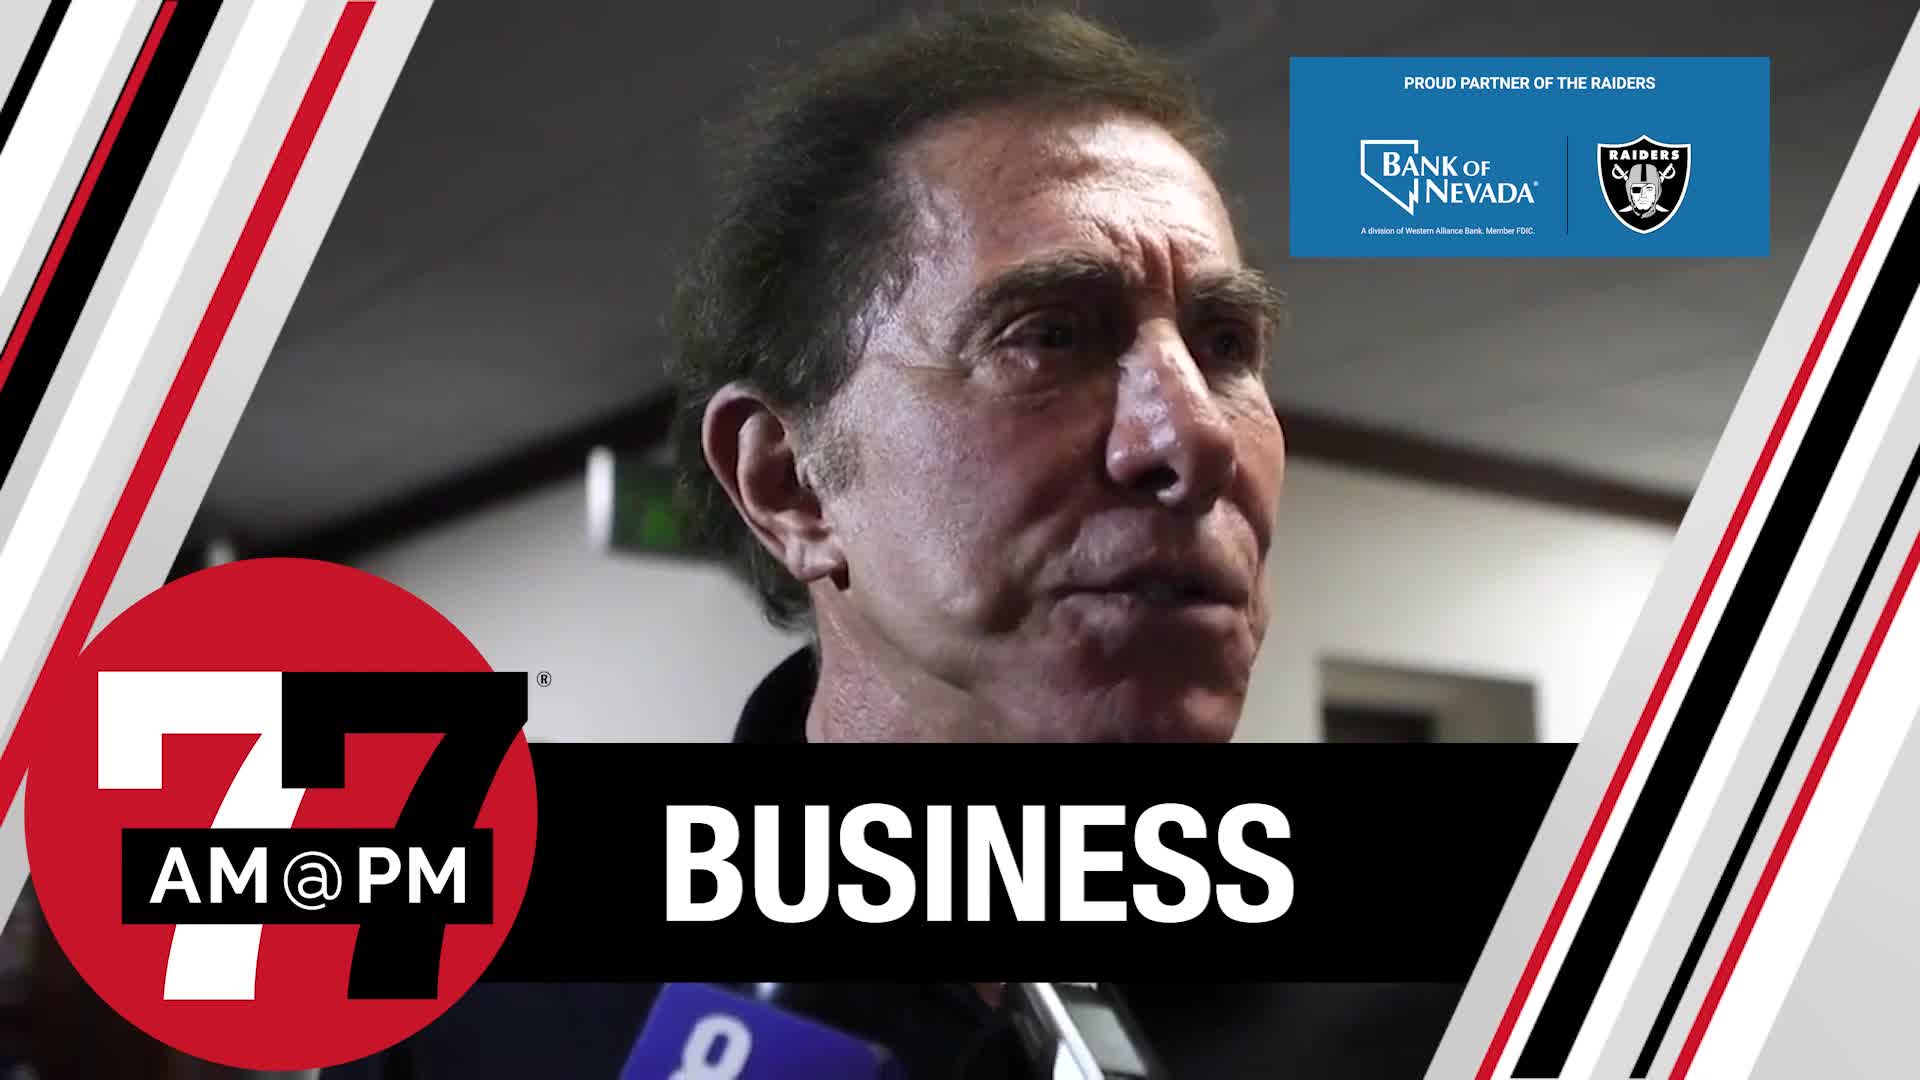 Steve Wynn’s career in gaming comes to an end